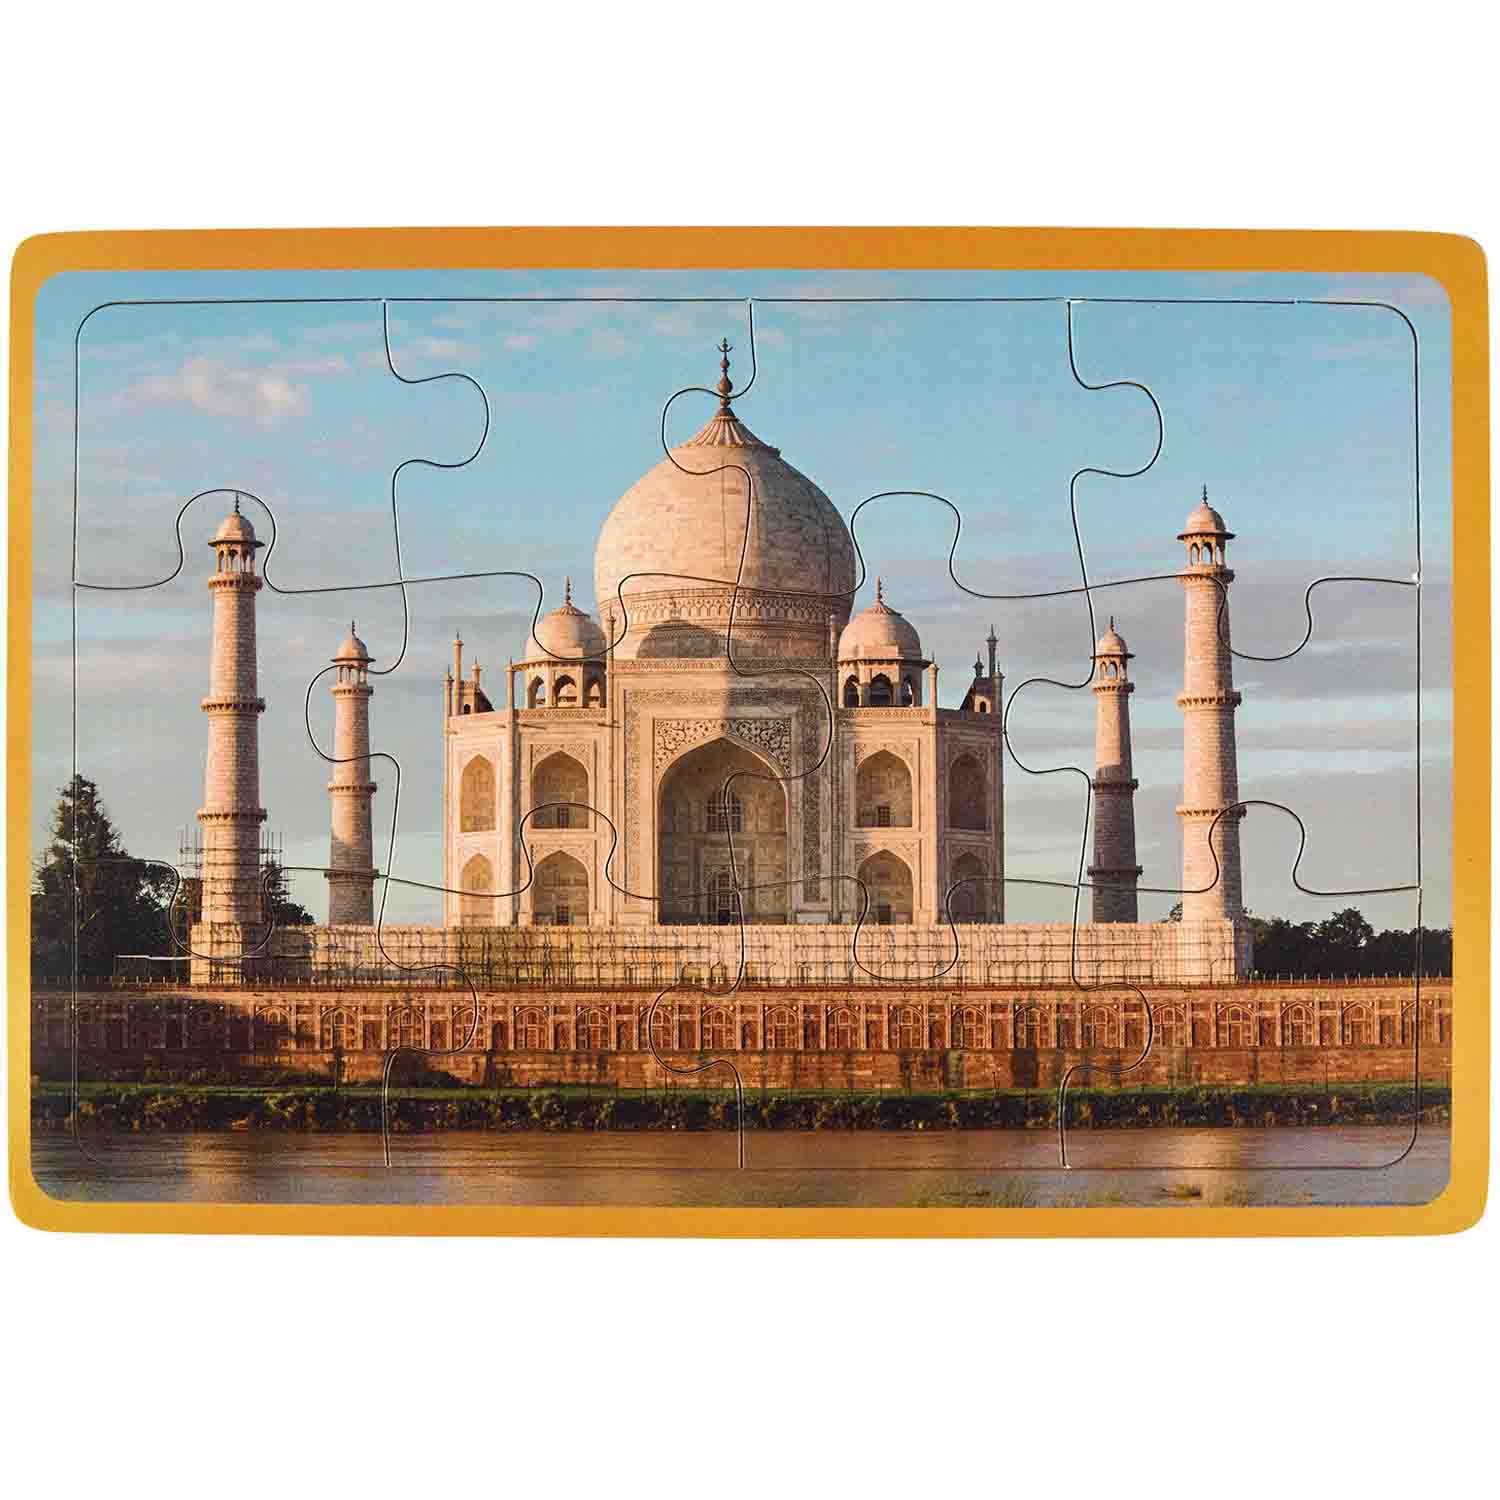 Becker's Building Inspirations 12-Piece Puzzles, Set of 6